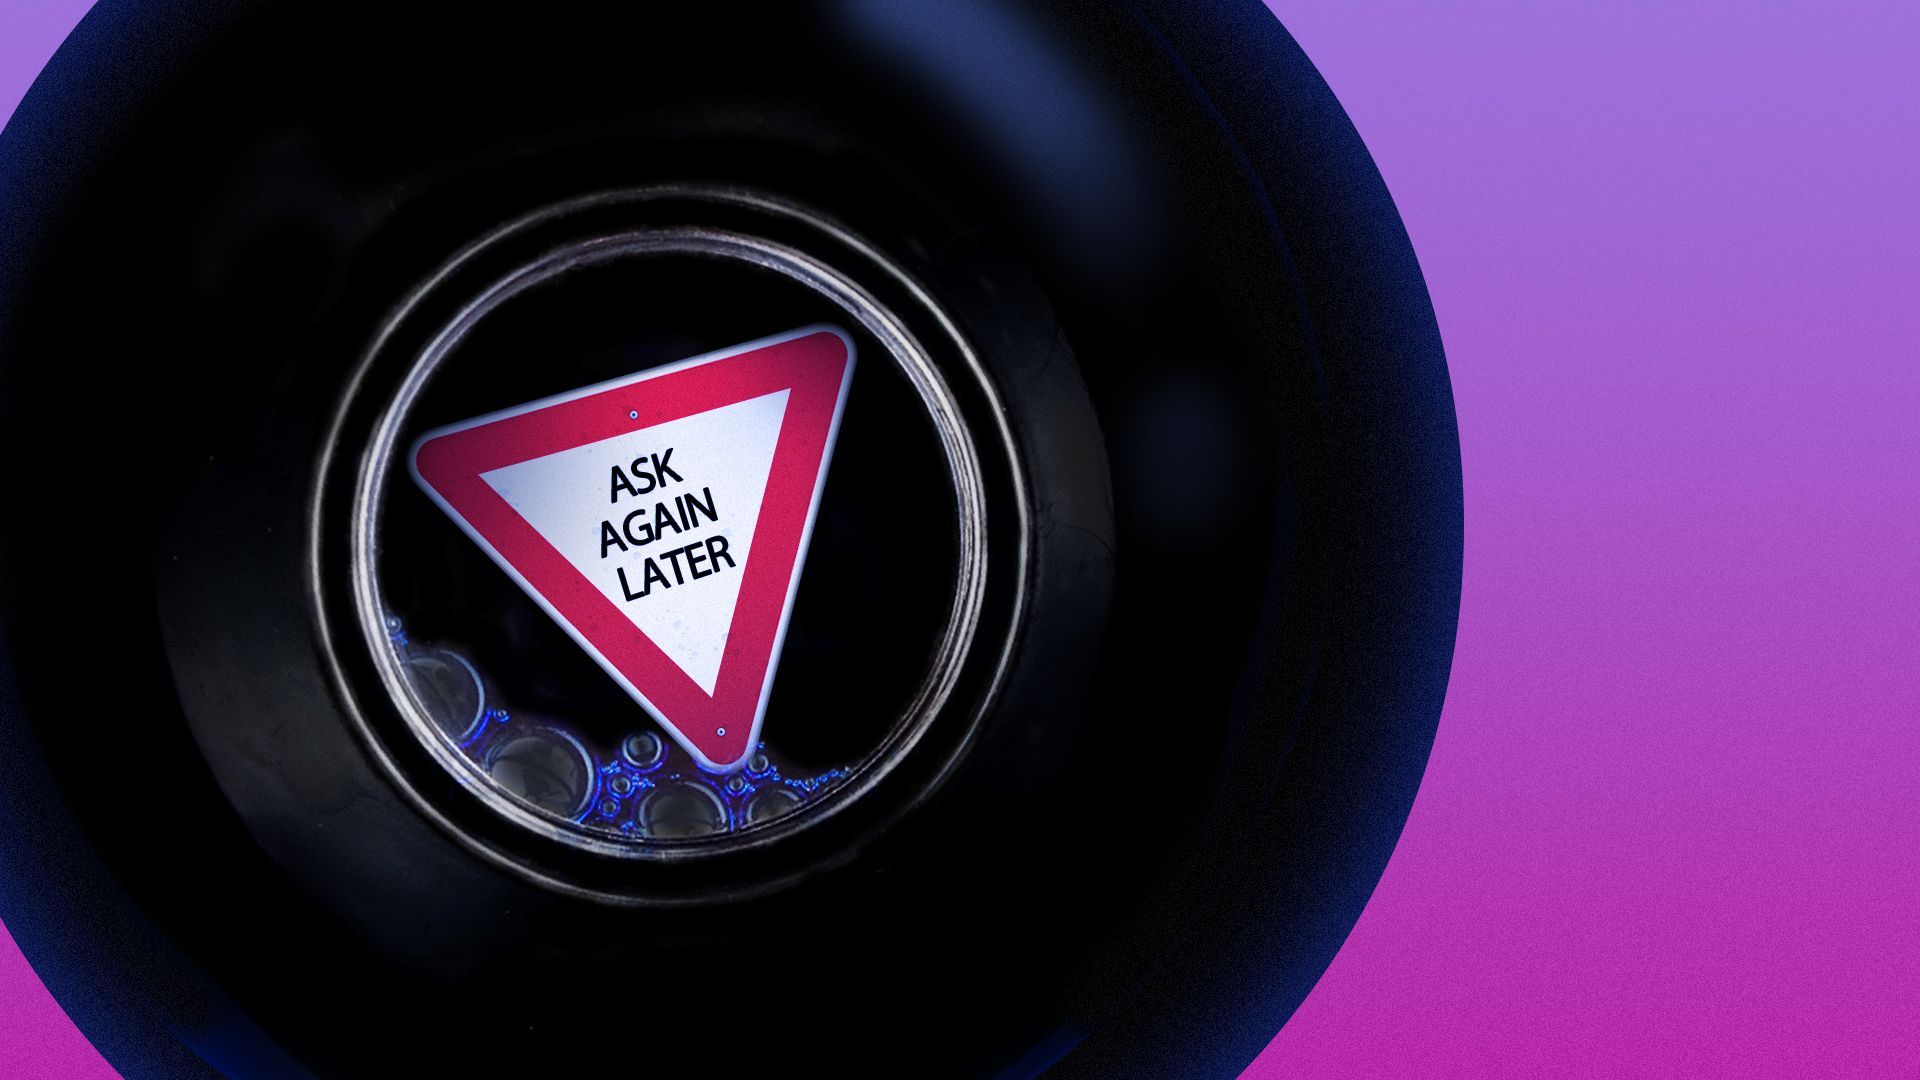 Illustration of a magic eight ball with a yield sign inside that reads "ask again later"